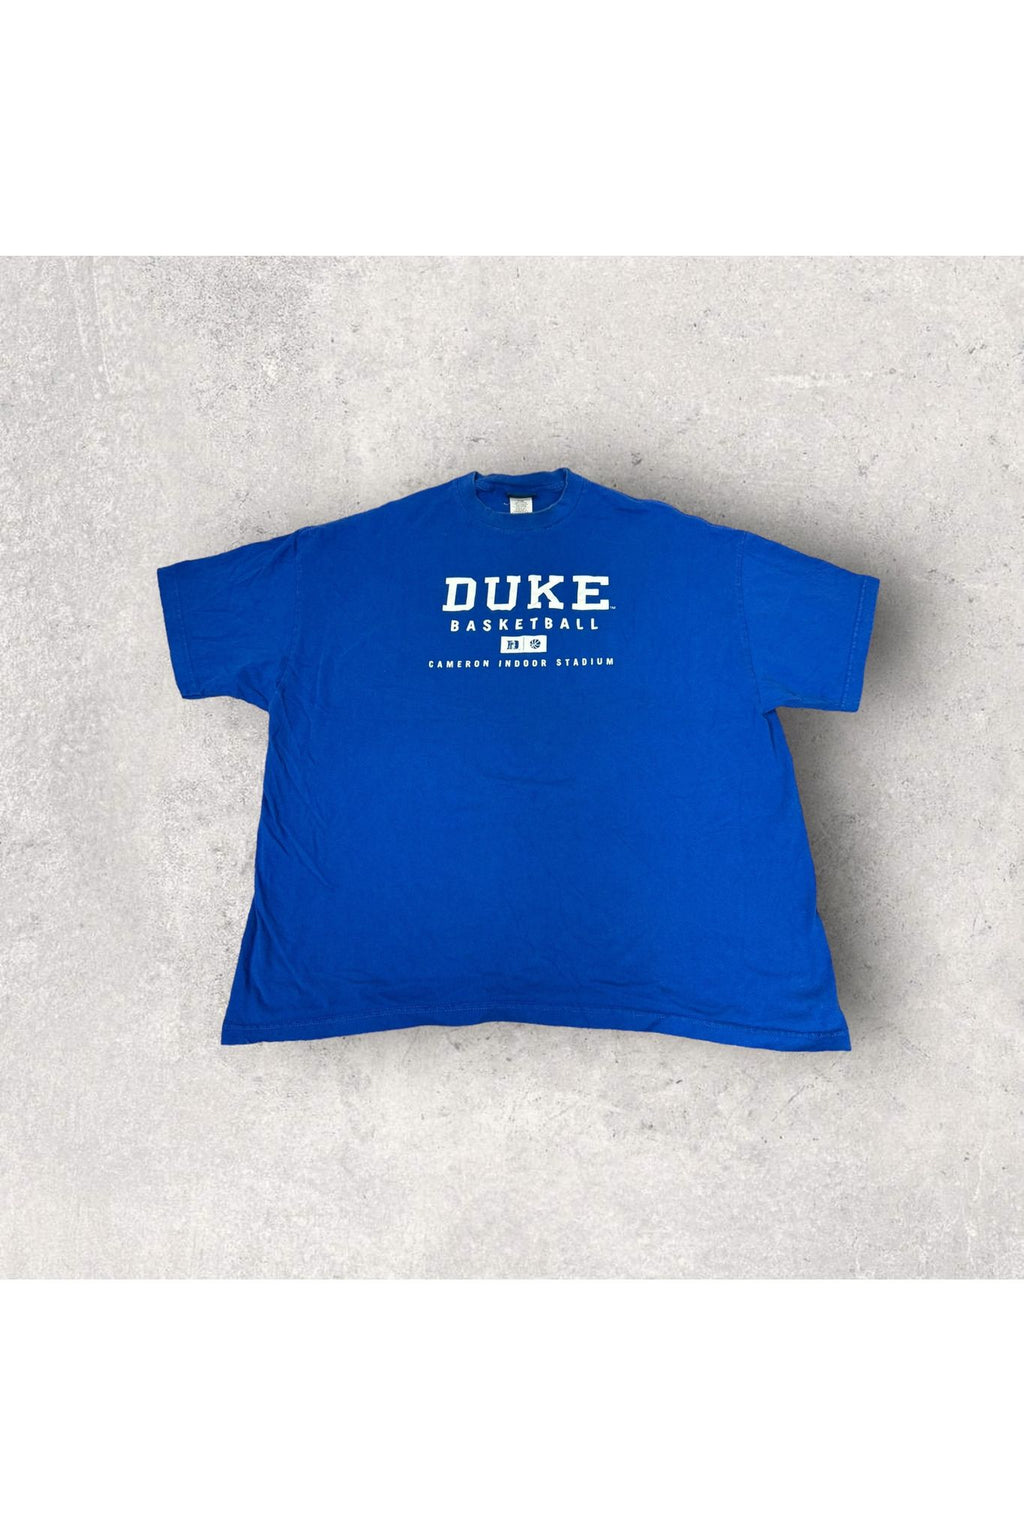 Vintage Made In USA Champs Duke Basketball Tee- XL